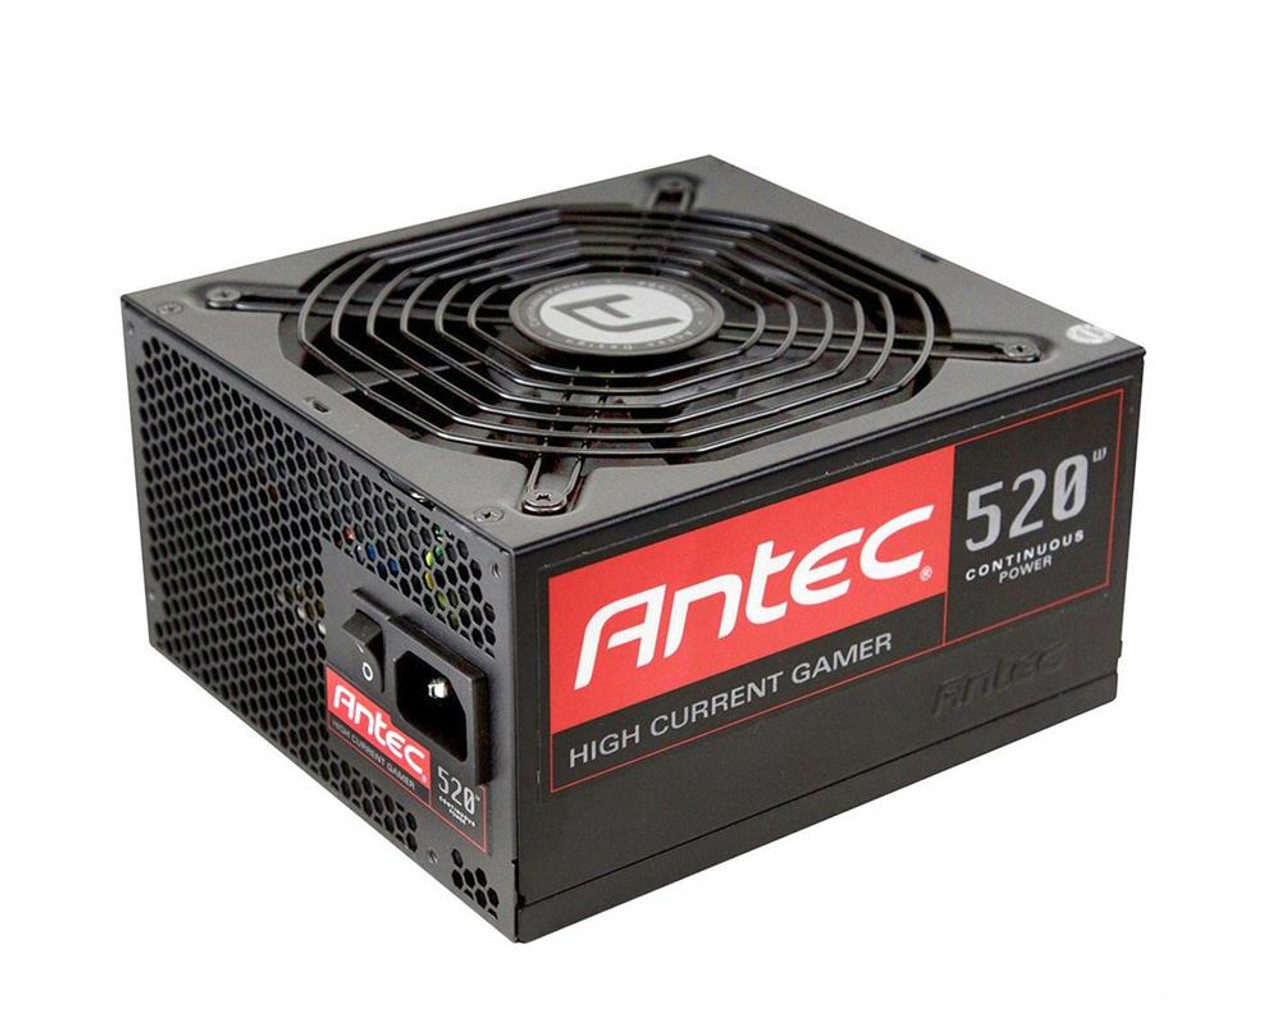 0761345-06205-3 Antec High Current Gamer Series 520-Watts ATX 12V 80Plus Bronze Power Supply with Active PFC